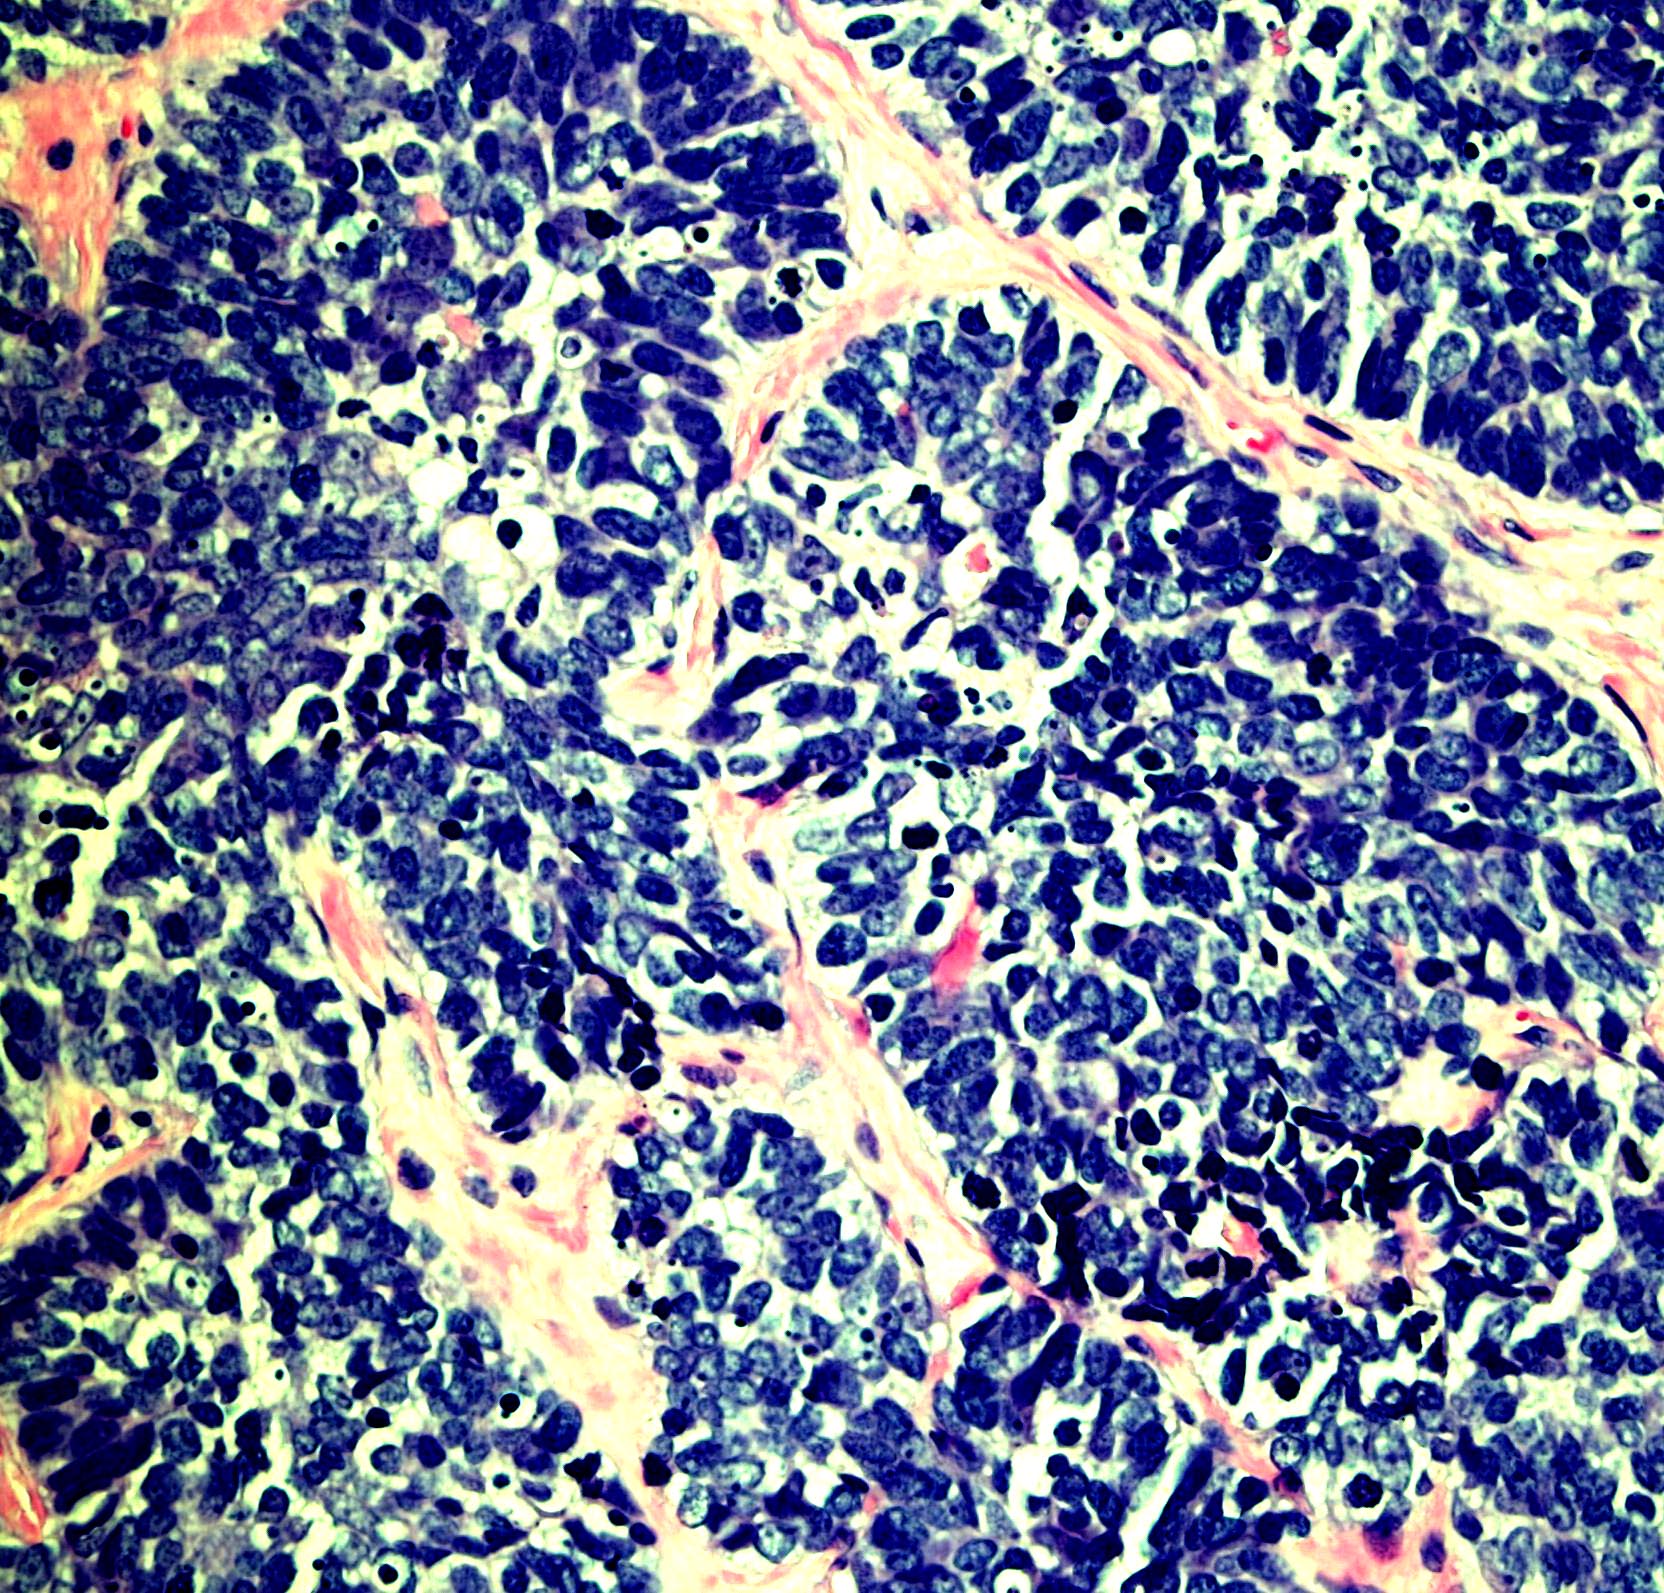 Lung small cell carcinoma